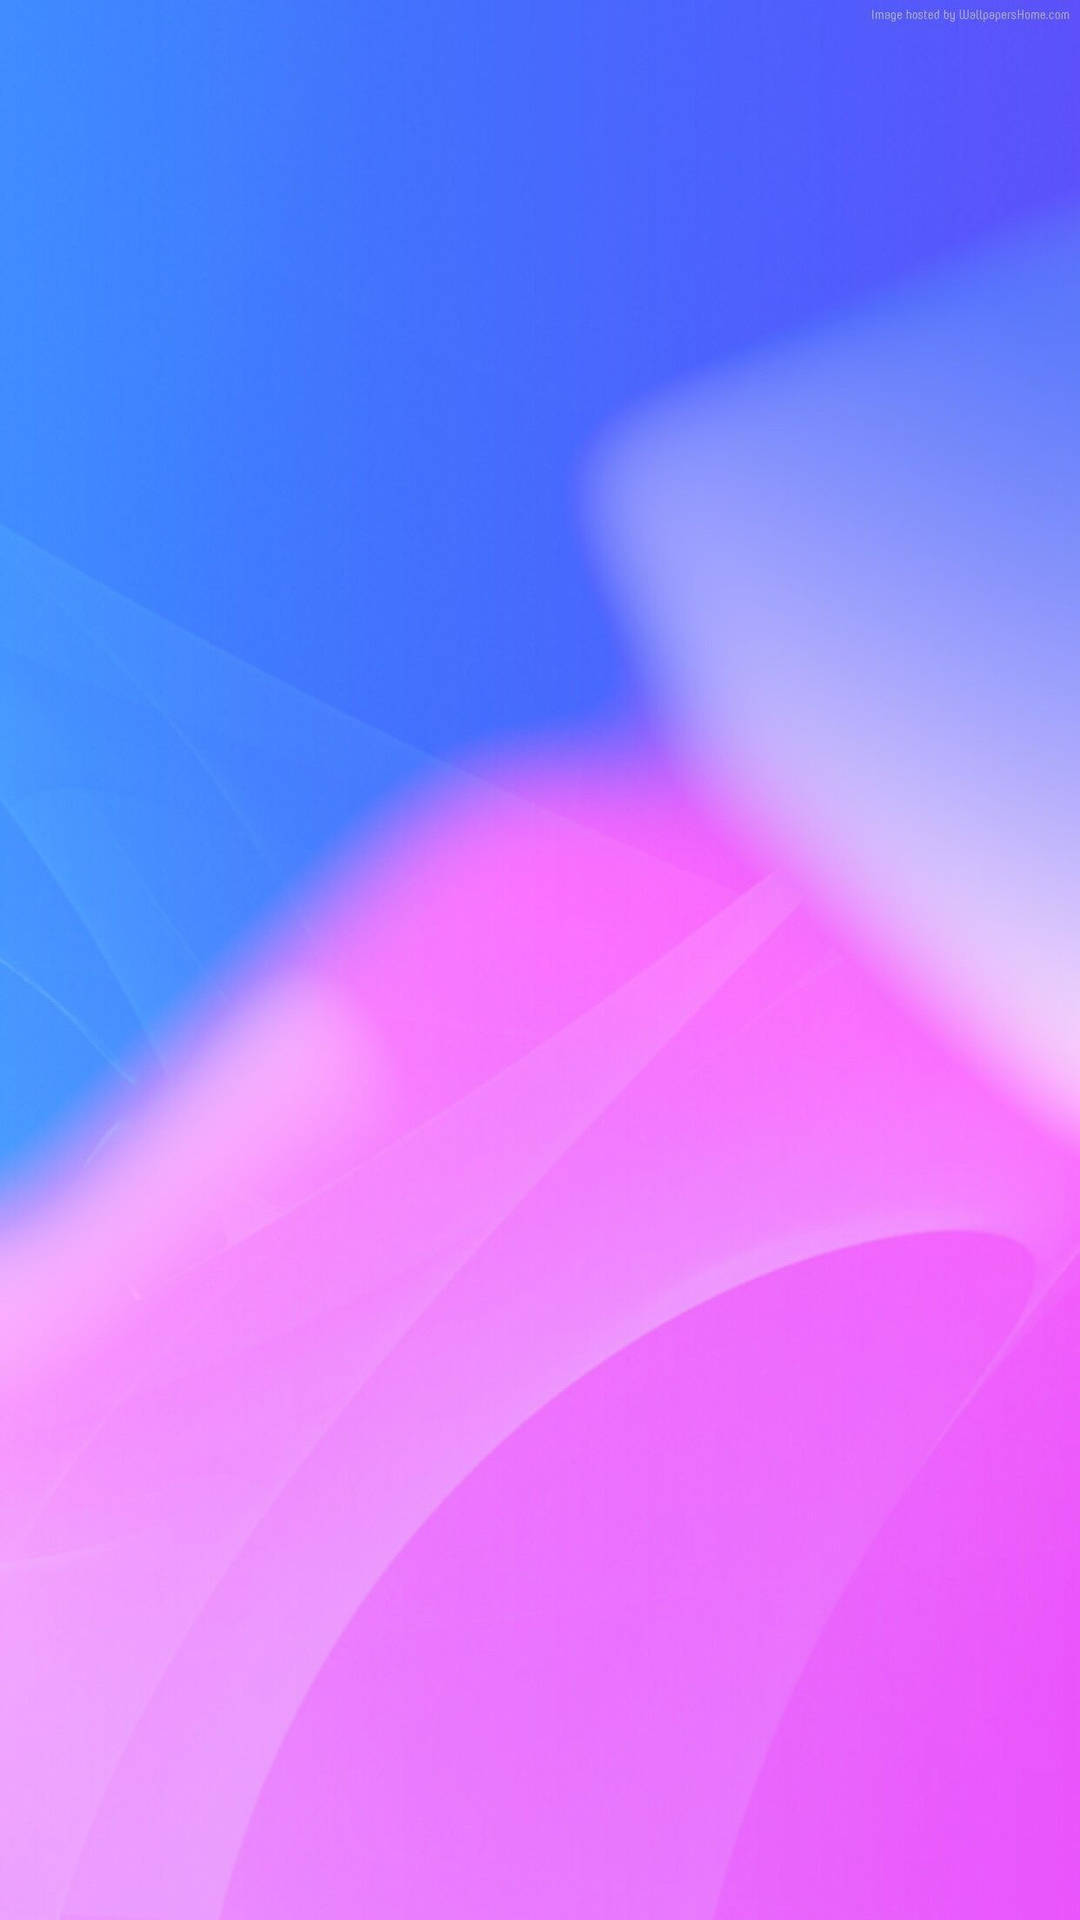 Graceful Interplay of Pink and Blue Shapes Wallpaper